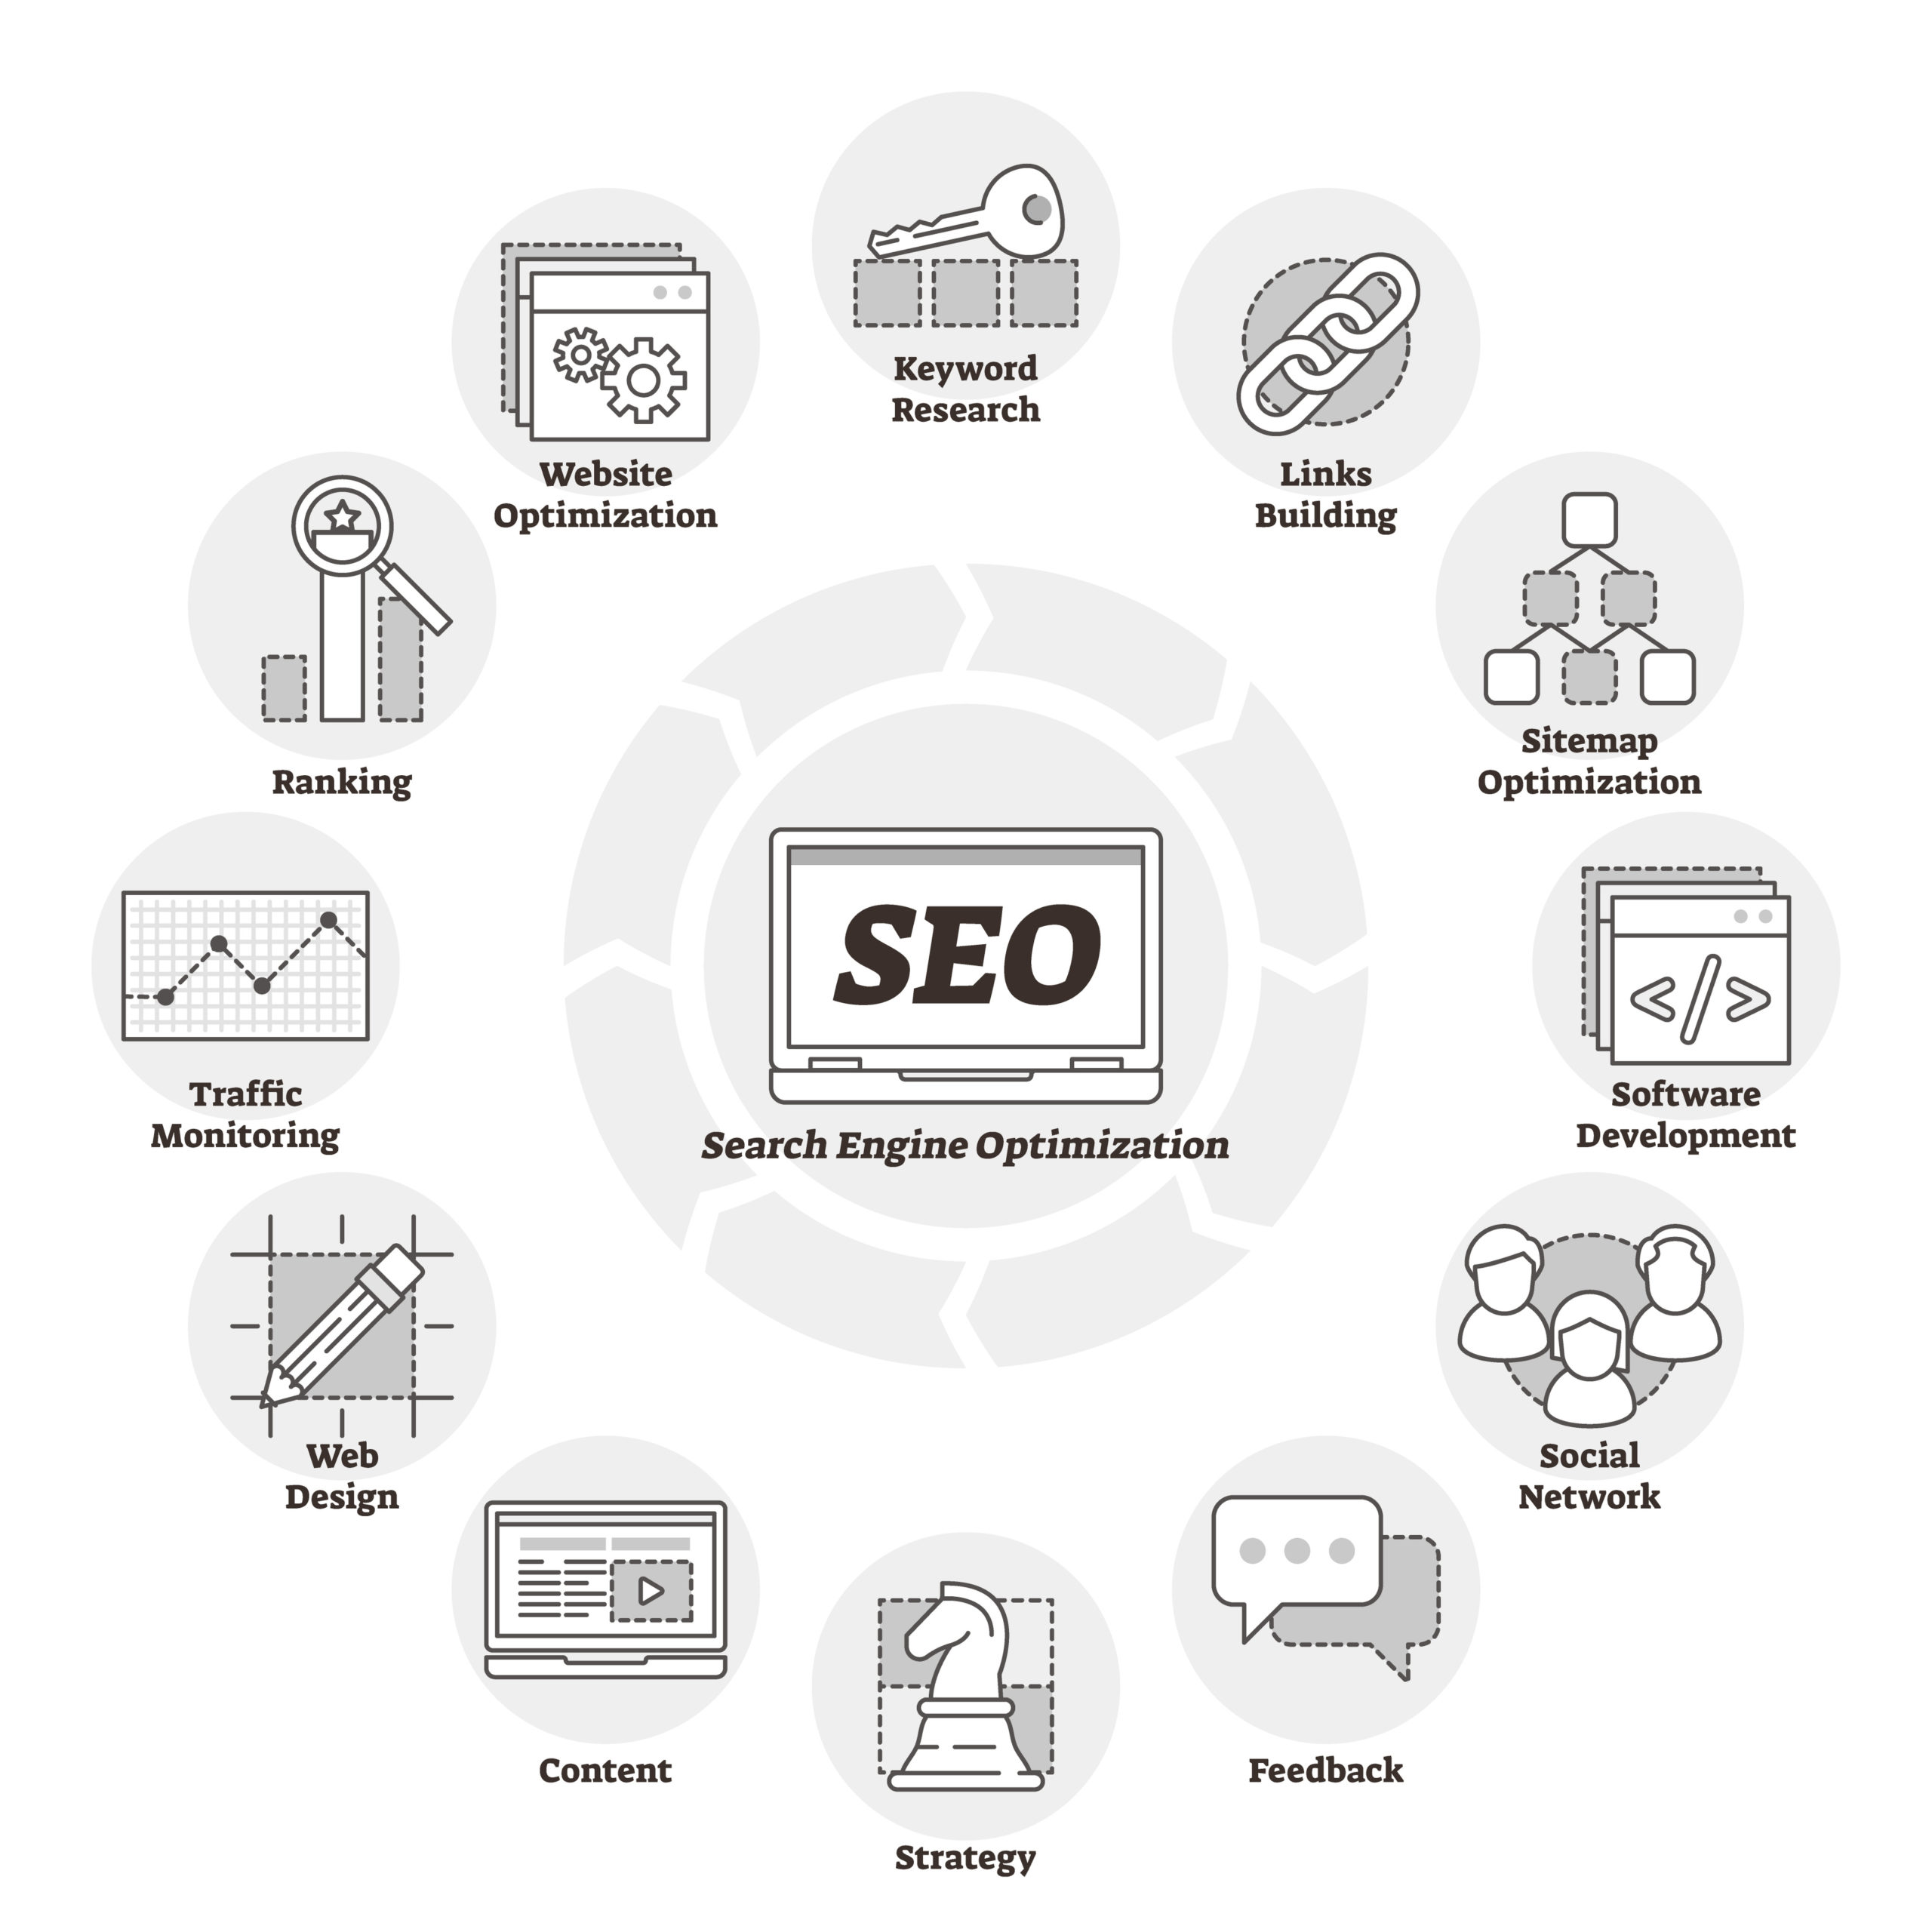 Search engine optimization or SEO vector illustration. Web page